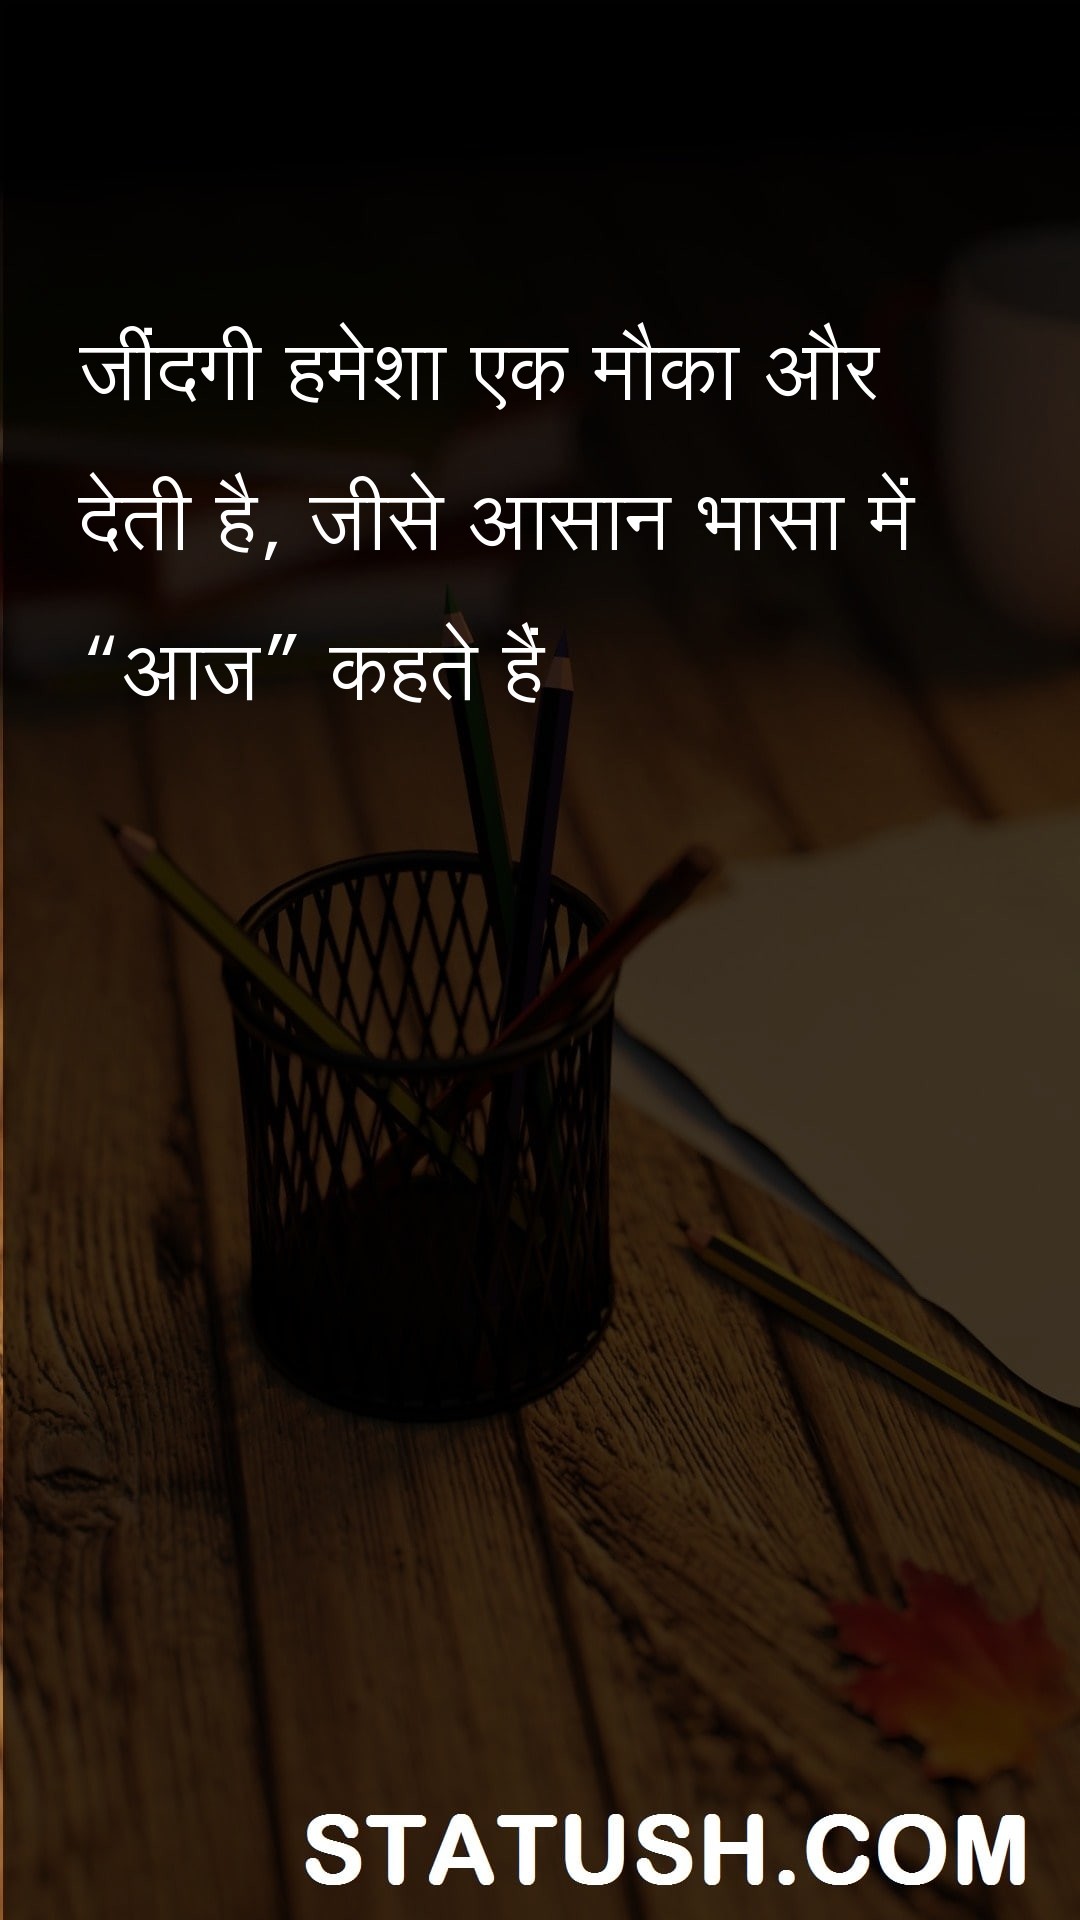 Life always gives another chance - Hindi Quotes at statush.com